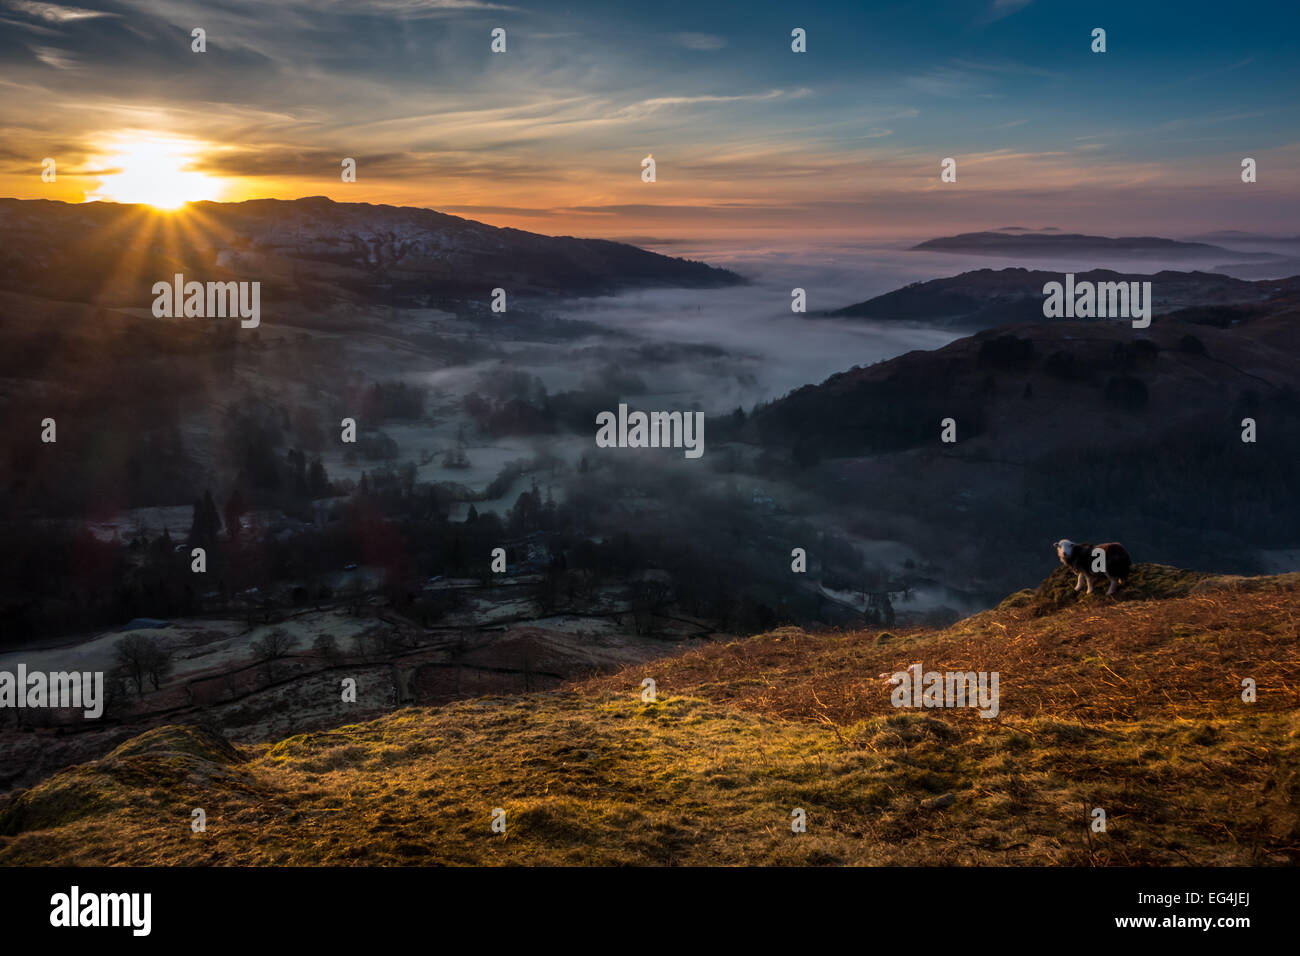 Beautiful dramatic rural view of misty Ambleside, above the mist on the Fairfield horseshoe at dawn, sunrise in The English Lake District, England, UK Stock Photo